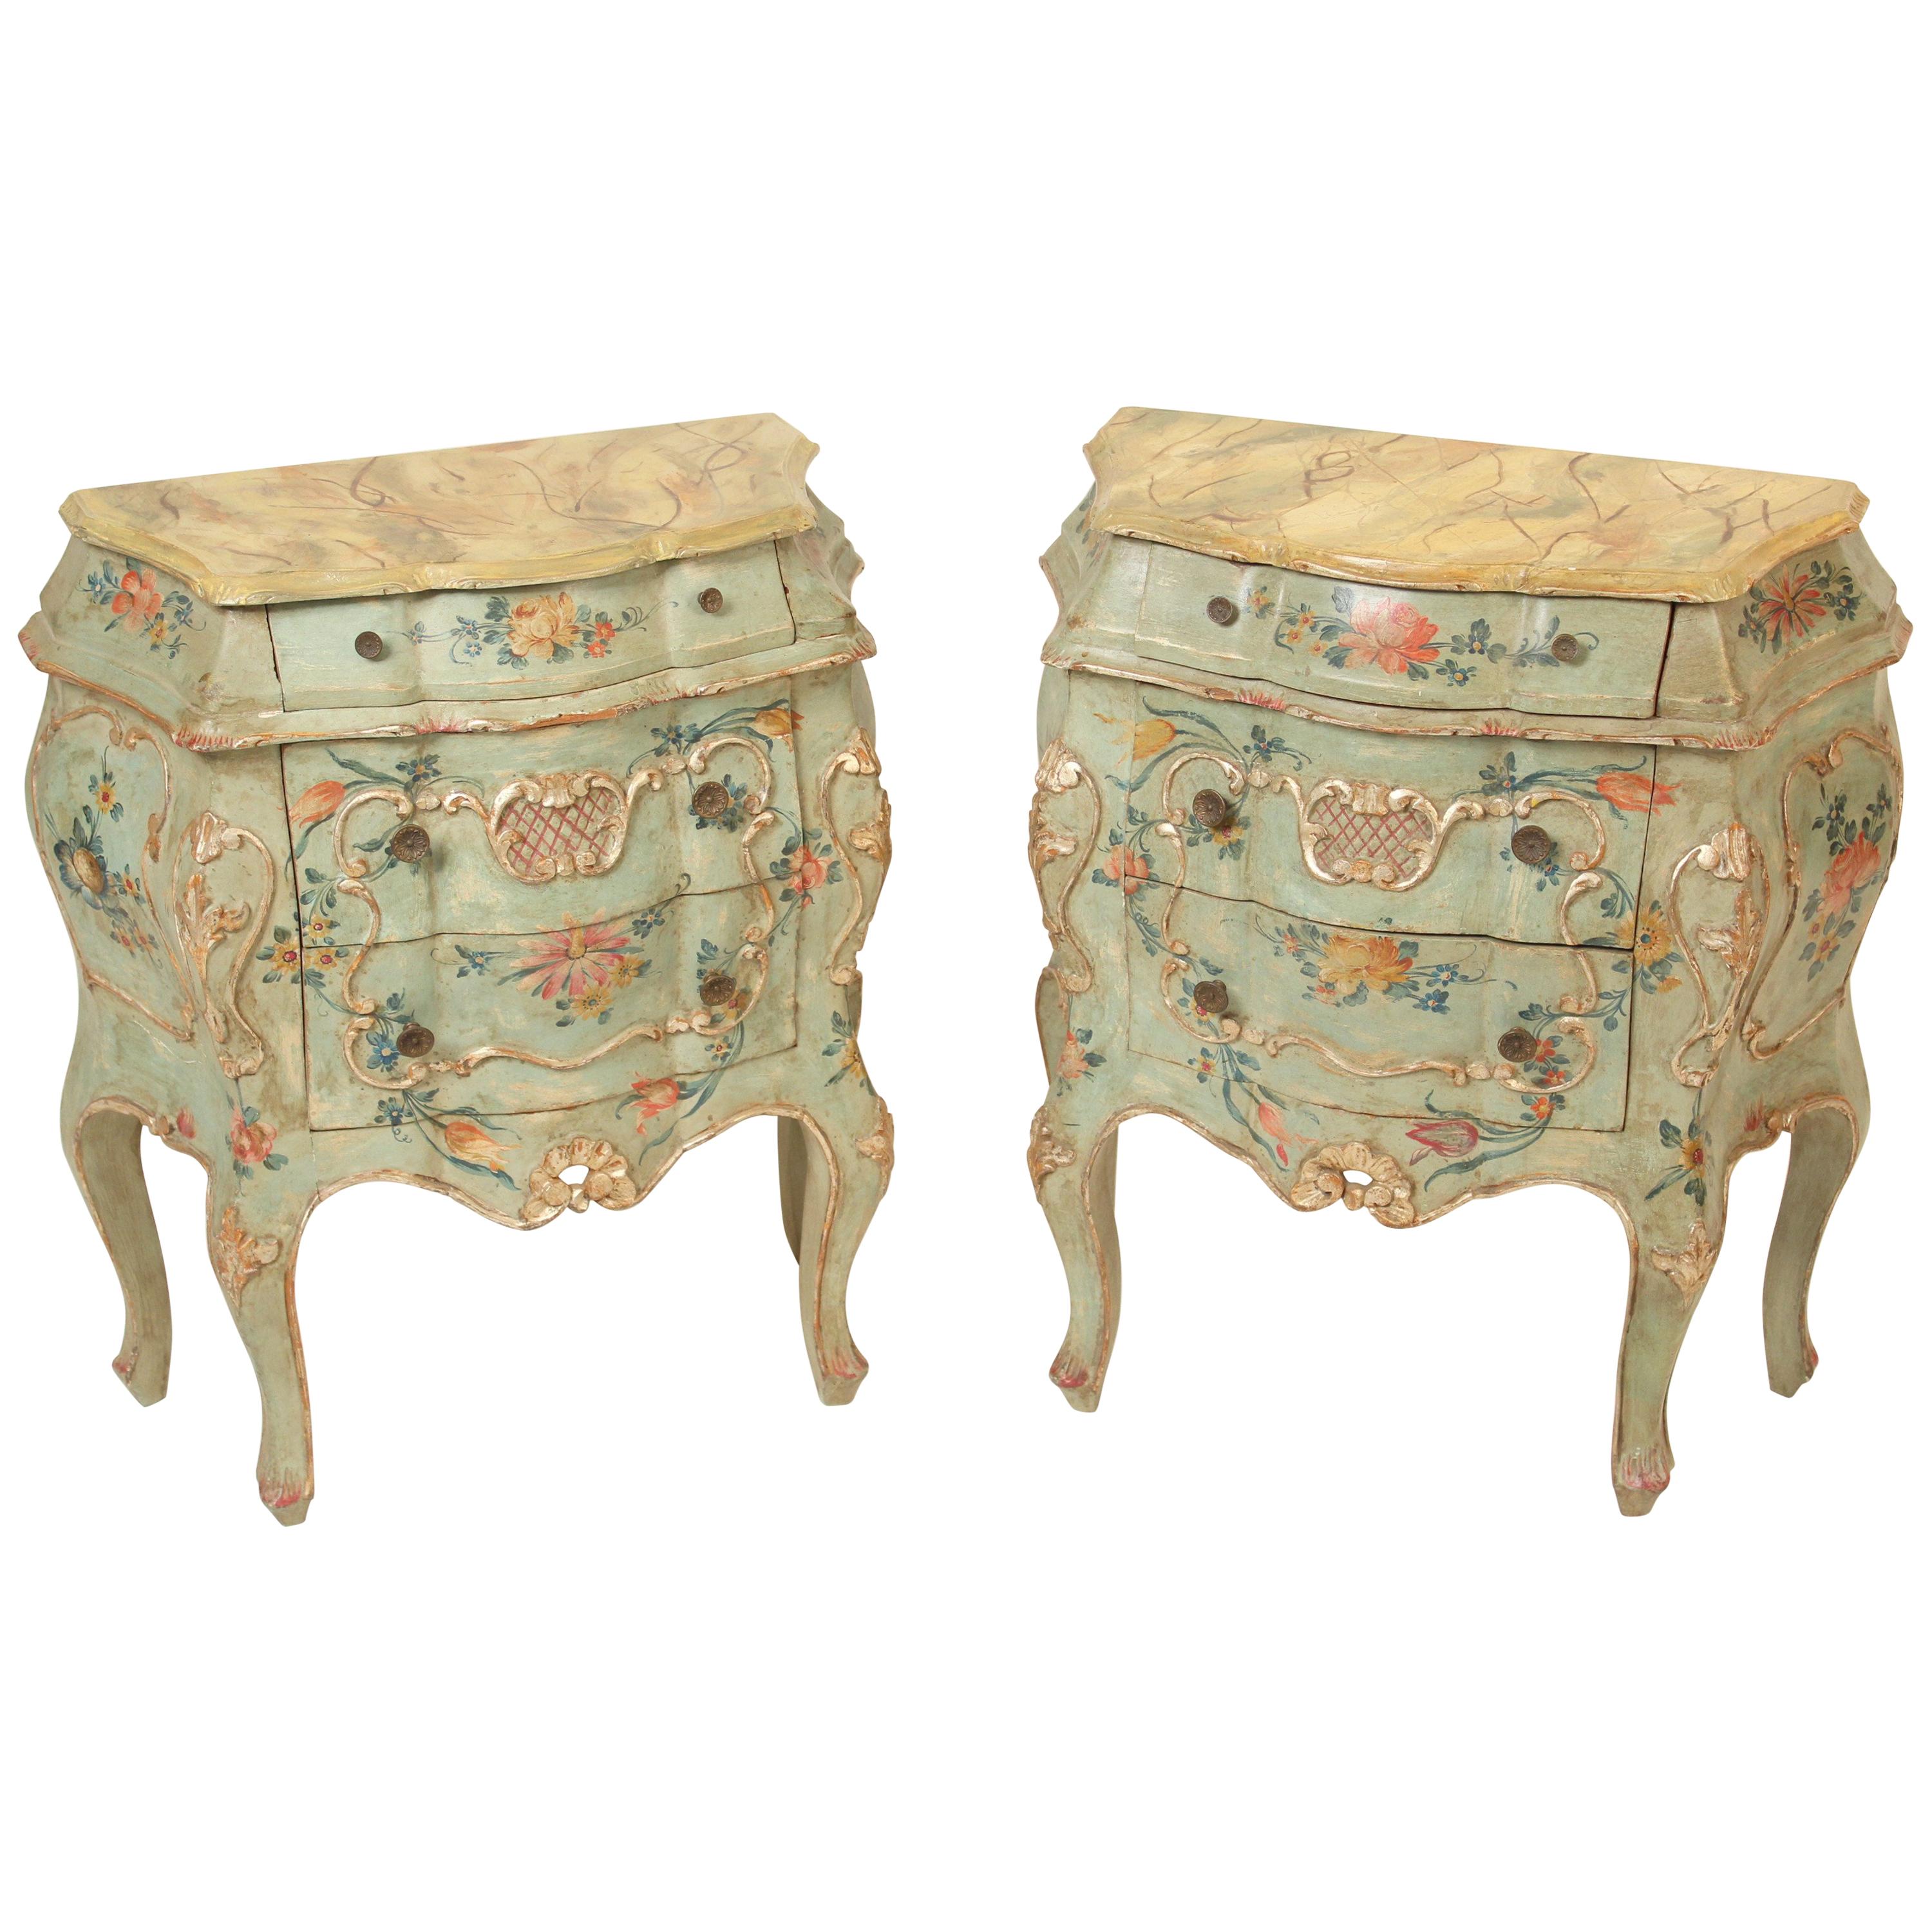 Pair of Painted Italian Chests of Drawers